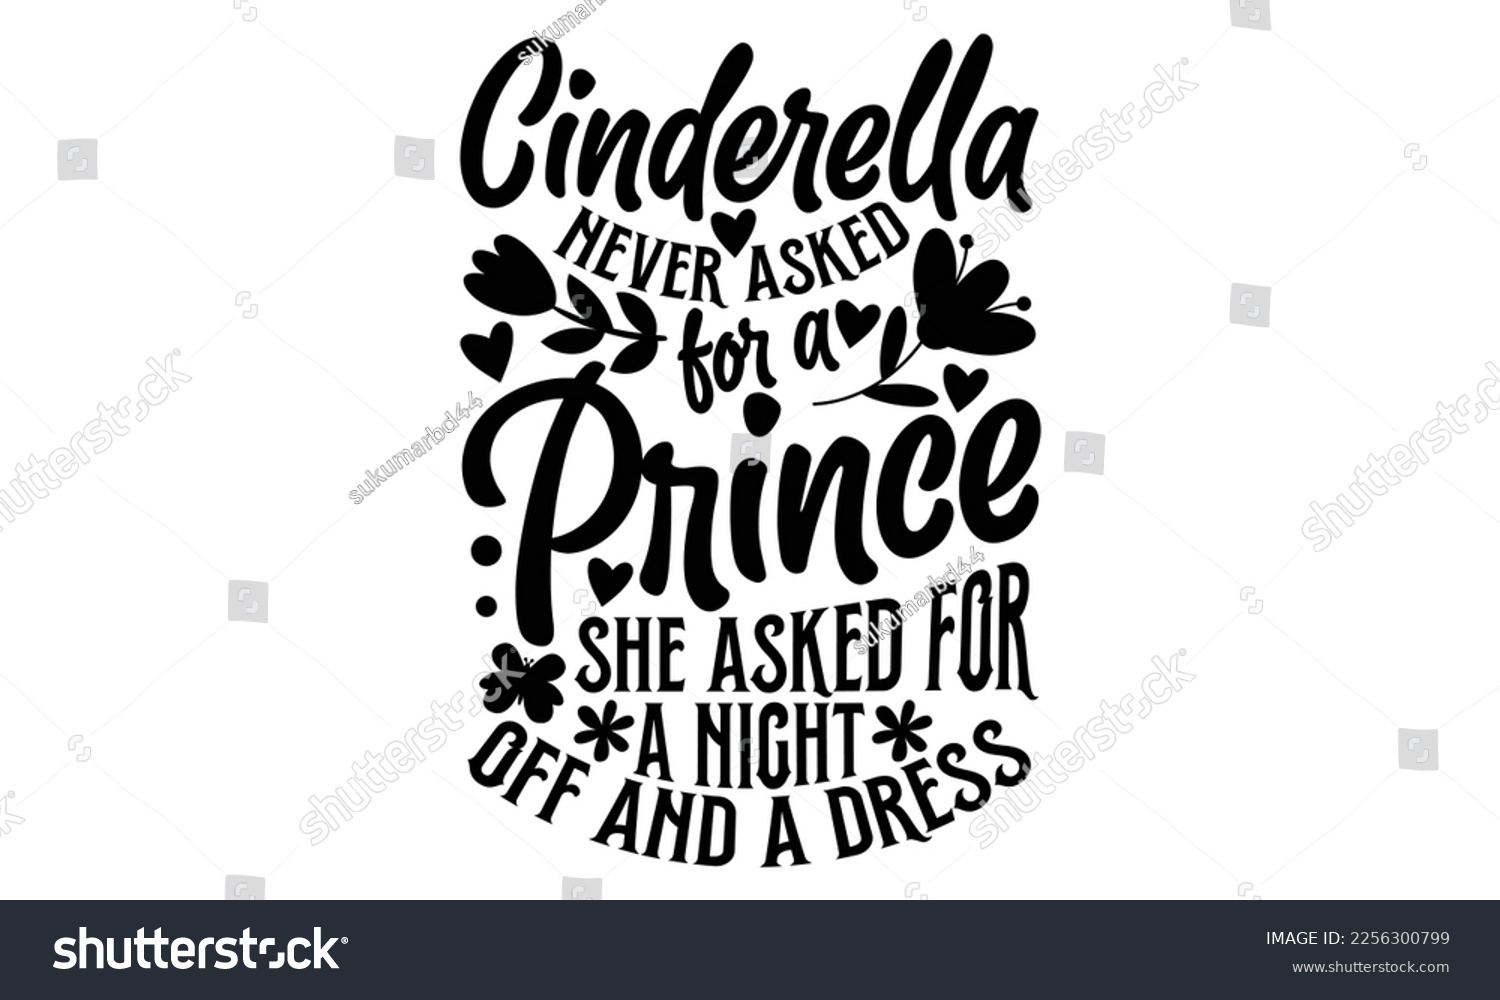 SVG of Cinderella Never Asked For A Prince She Asked For A Night Off And A Dress - Women's Day T-shirt Design, Calligraphy graphic design, SVG Files for Cutting, bag, cups, card, Handmade calligraphy quotes  svg